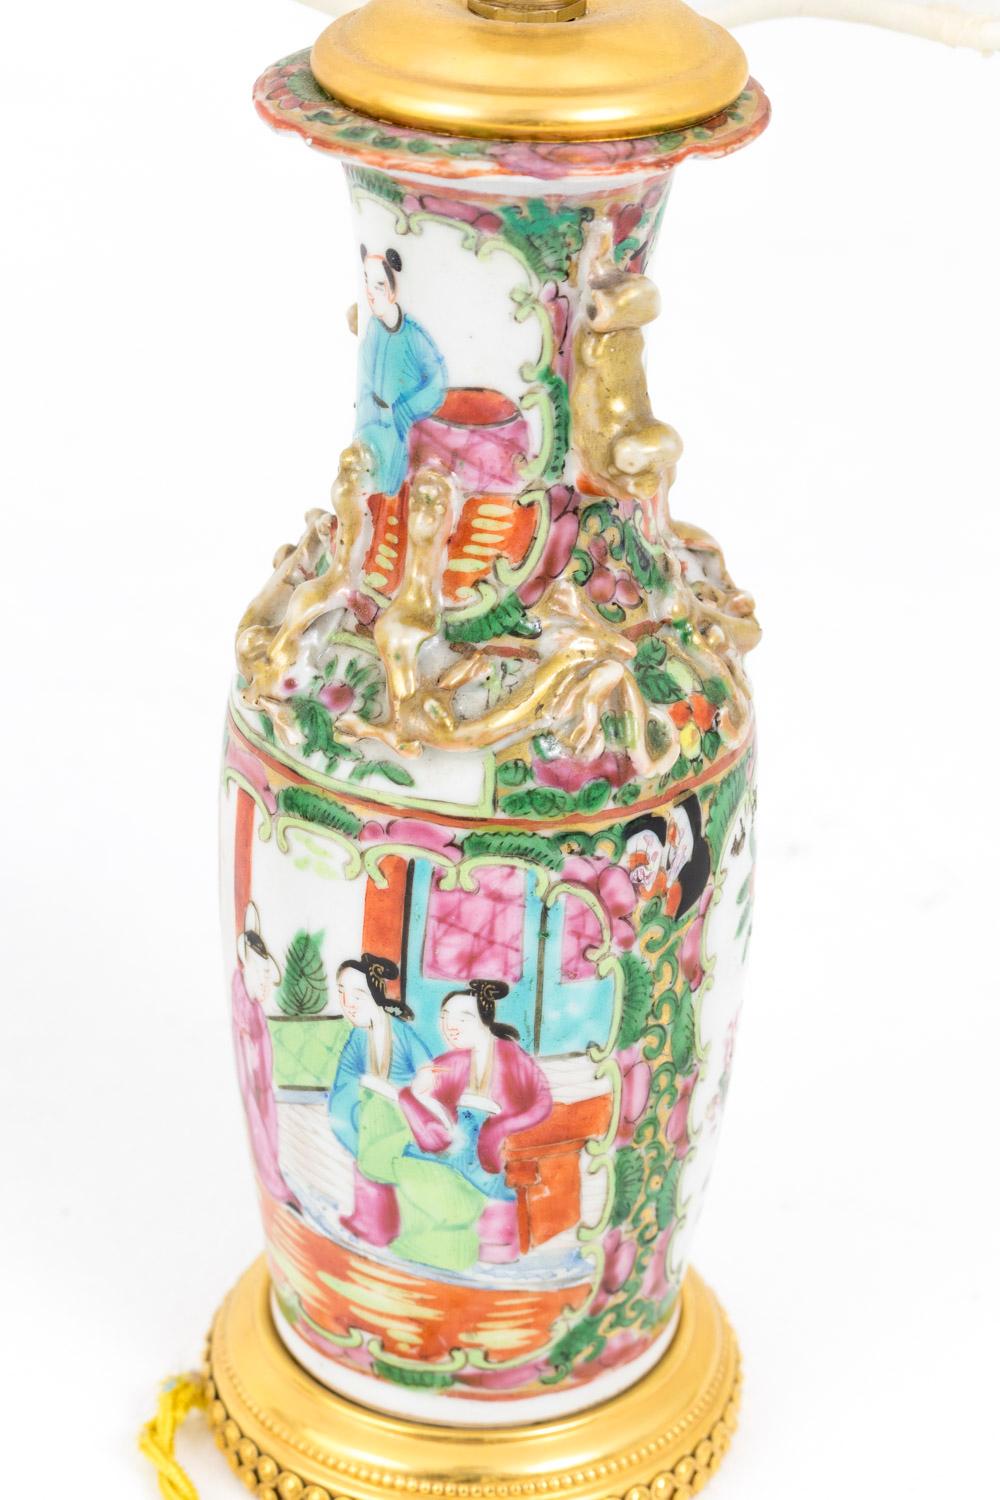 Pair of small bottle shape Canton porcelain lamps with a decor figuring palace scenes in cartouches on one side and flowers and birds on the other side, both framed by flowers and foliage. On the neck, ornamentation of sat Asian characters in